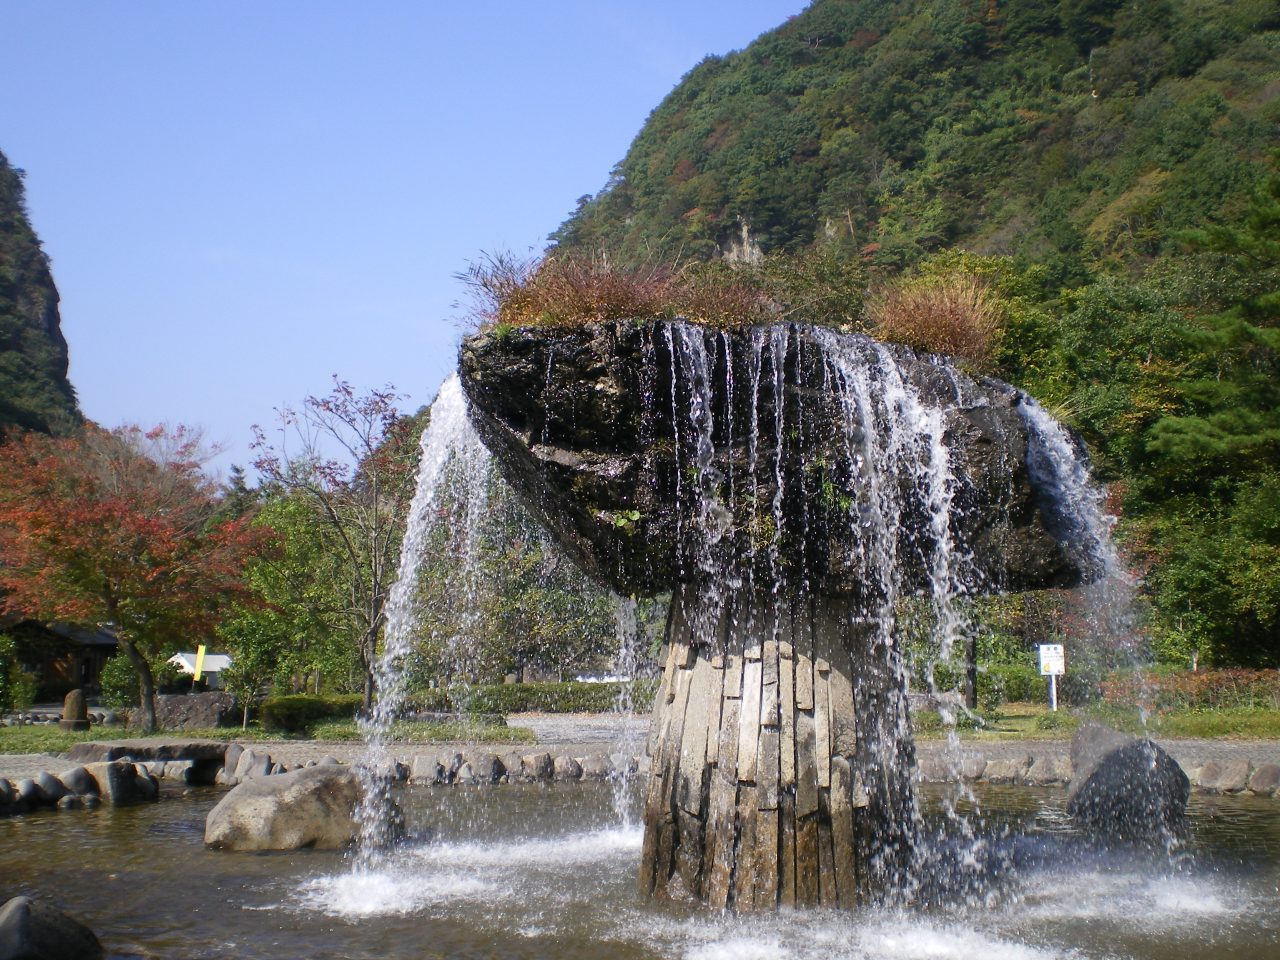 【Zaimokuiwa Koe (nThe Timber Rock Park)】"The park of a talk with water and stone" that makes you feel close to the beauty of "Timber Rock" designated as a natural treasure of Japan.